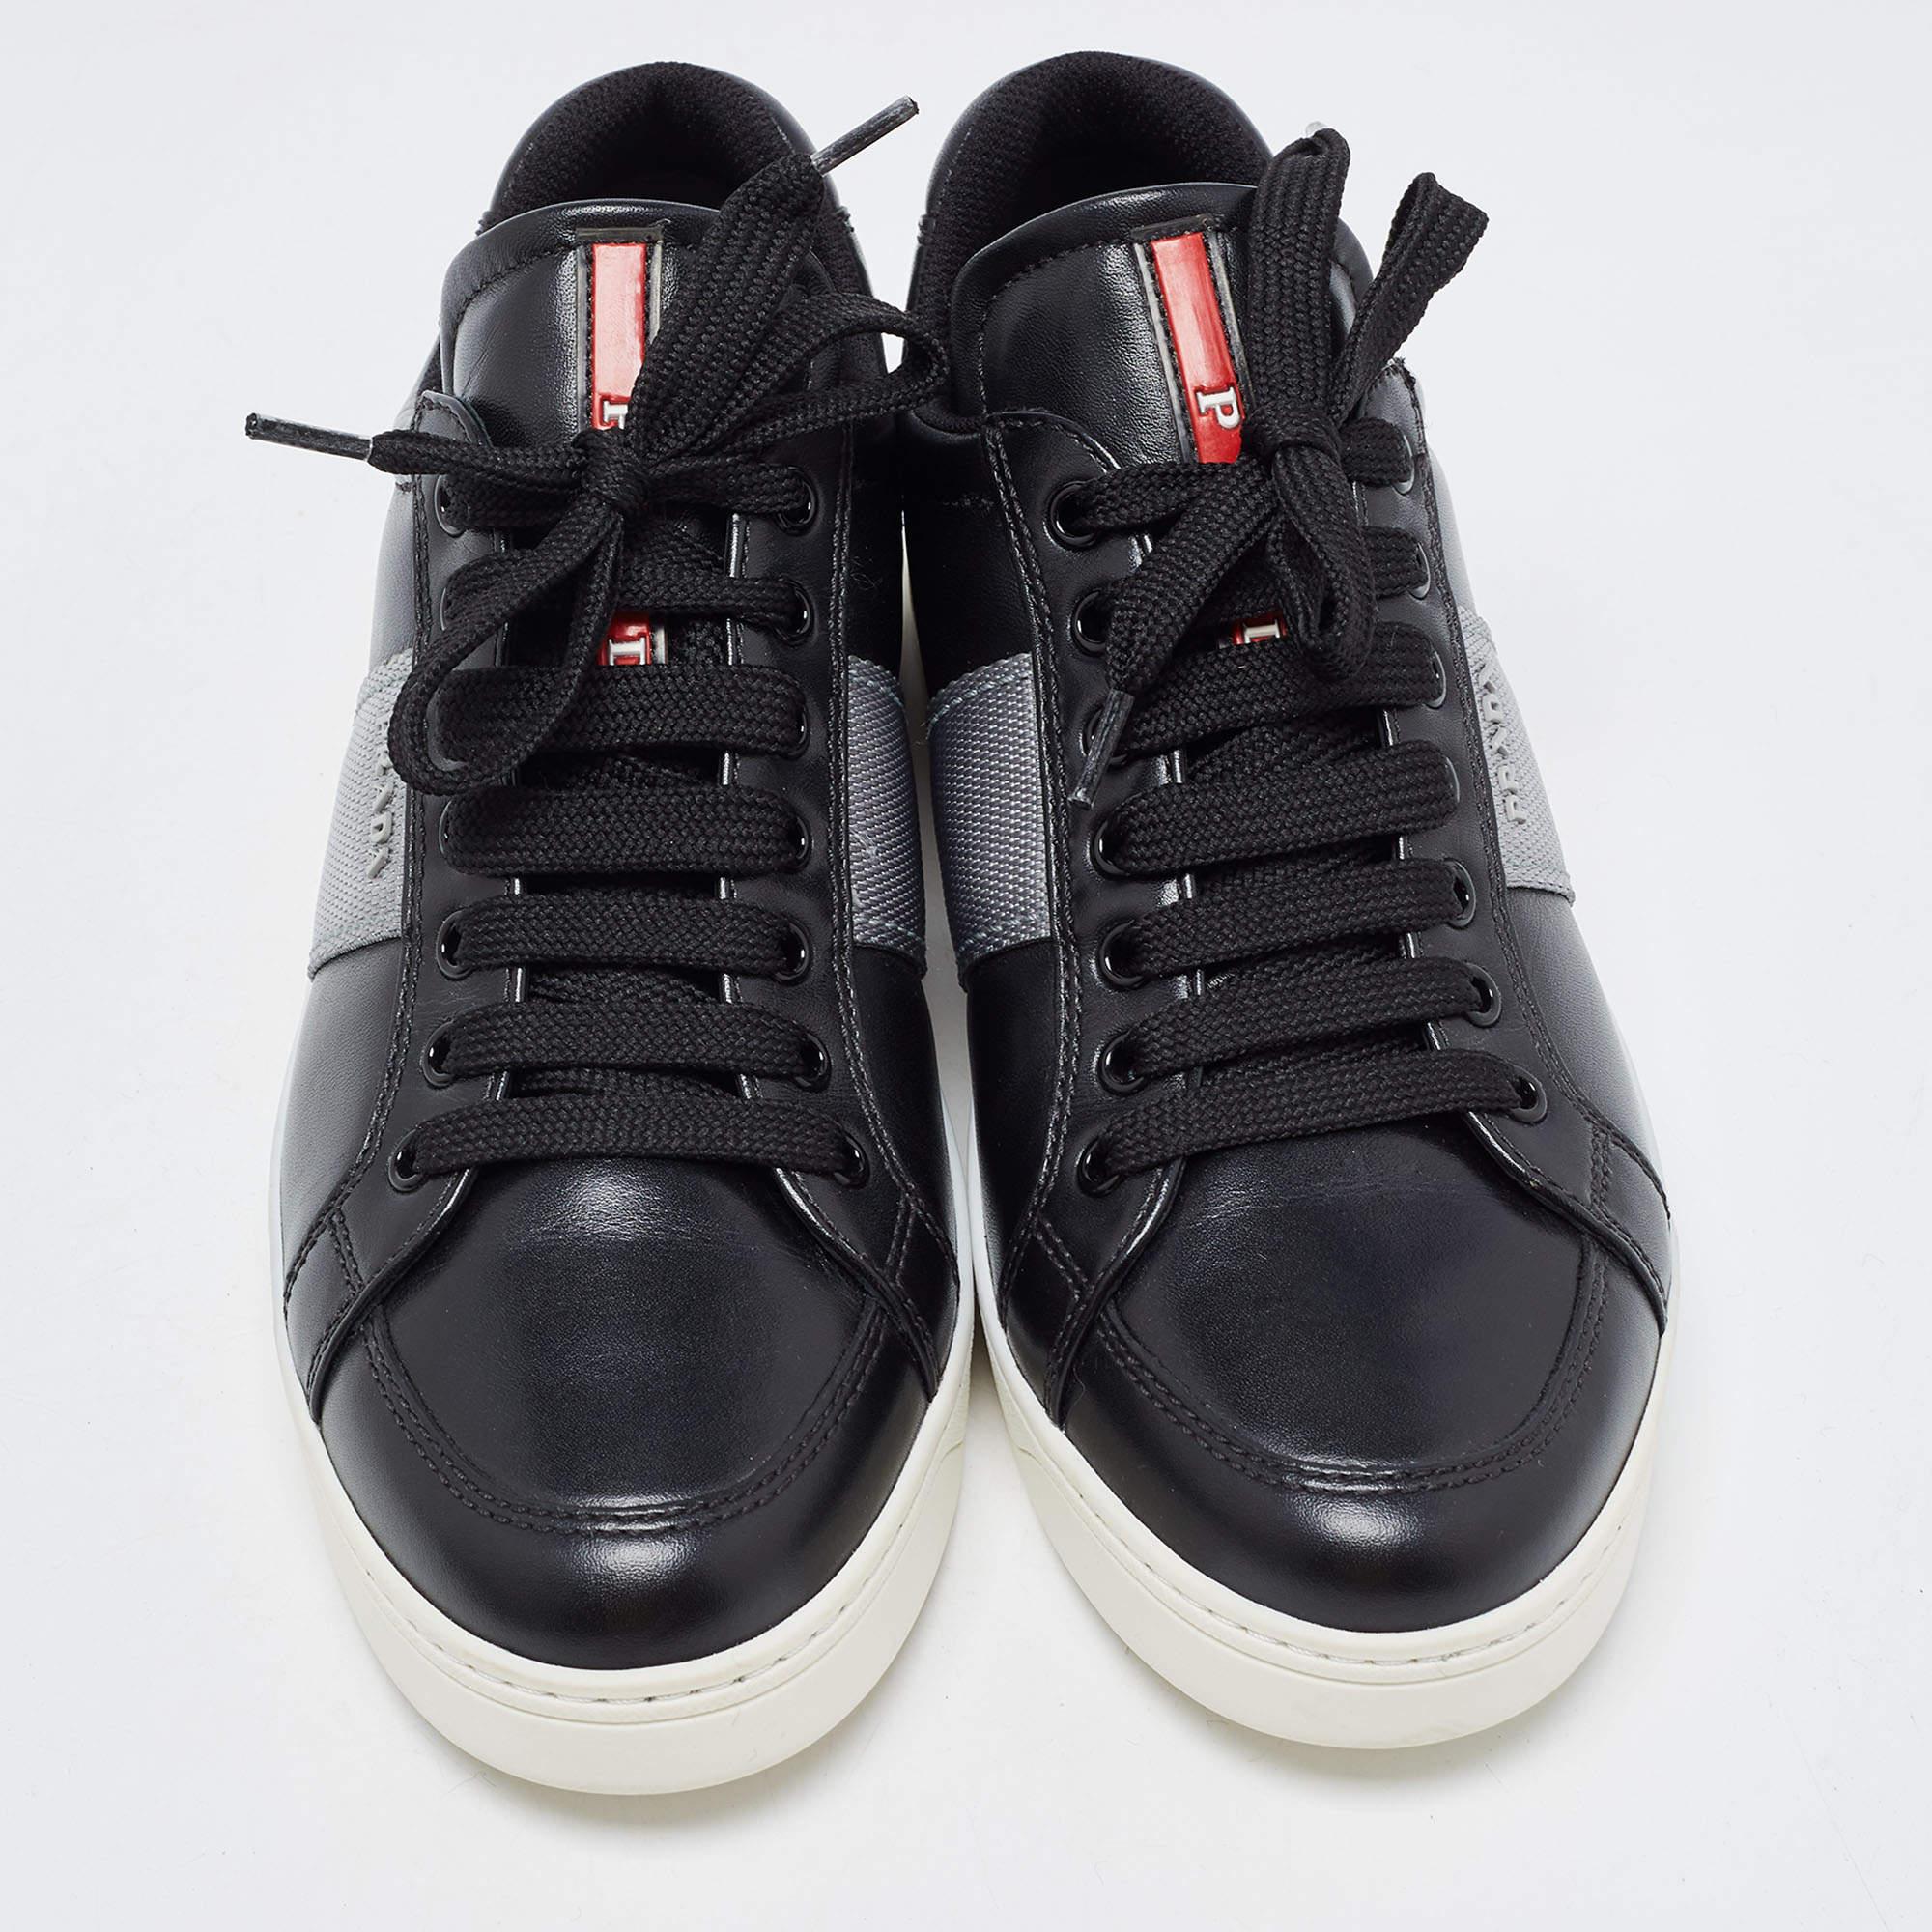 Coming in a classic silhouette, these Prada sneakers are a seamless combination of luxury, comfort, and style. These sneakers are designed with signature details and comfortable insoles.

